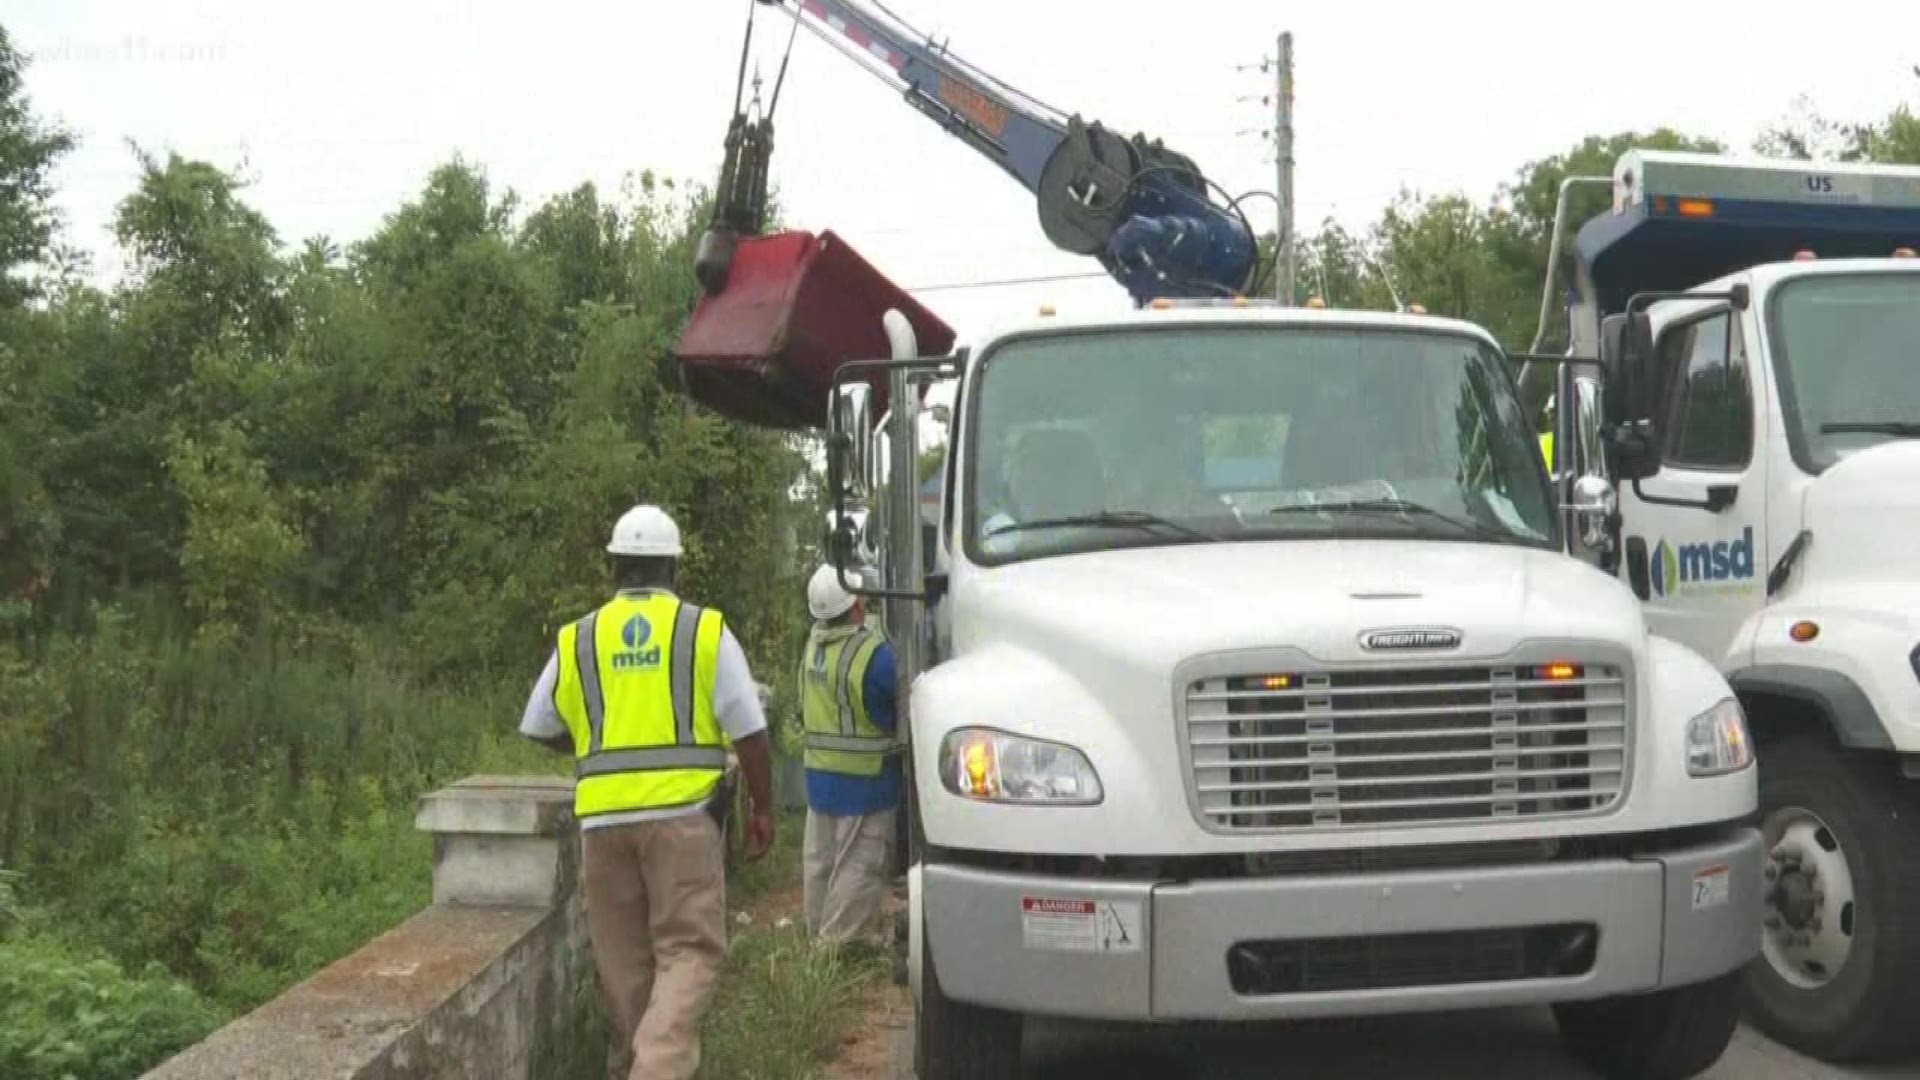 Crews had to bring in a special truck after items were dumped illegally in Goose Creek.